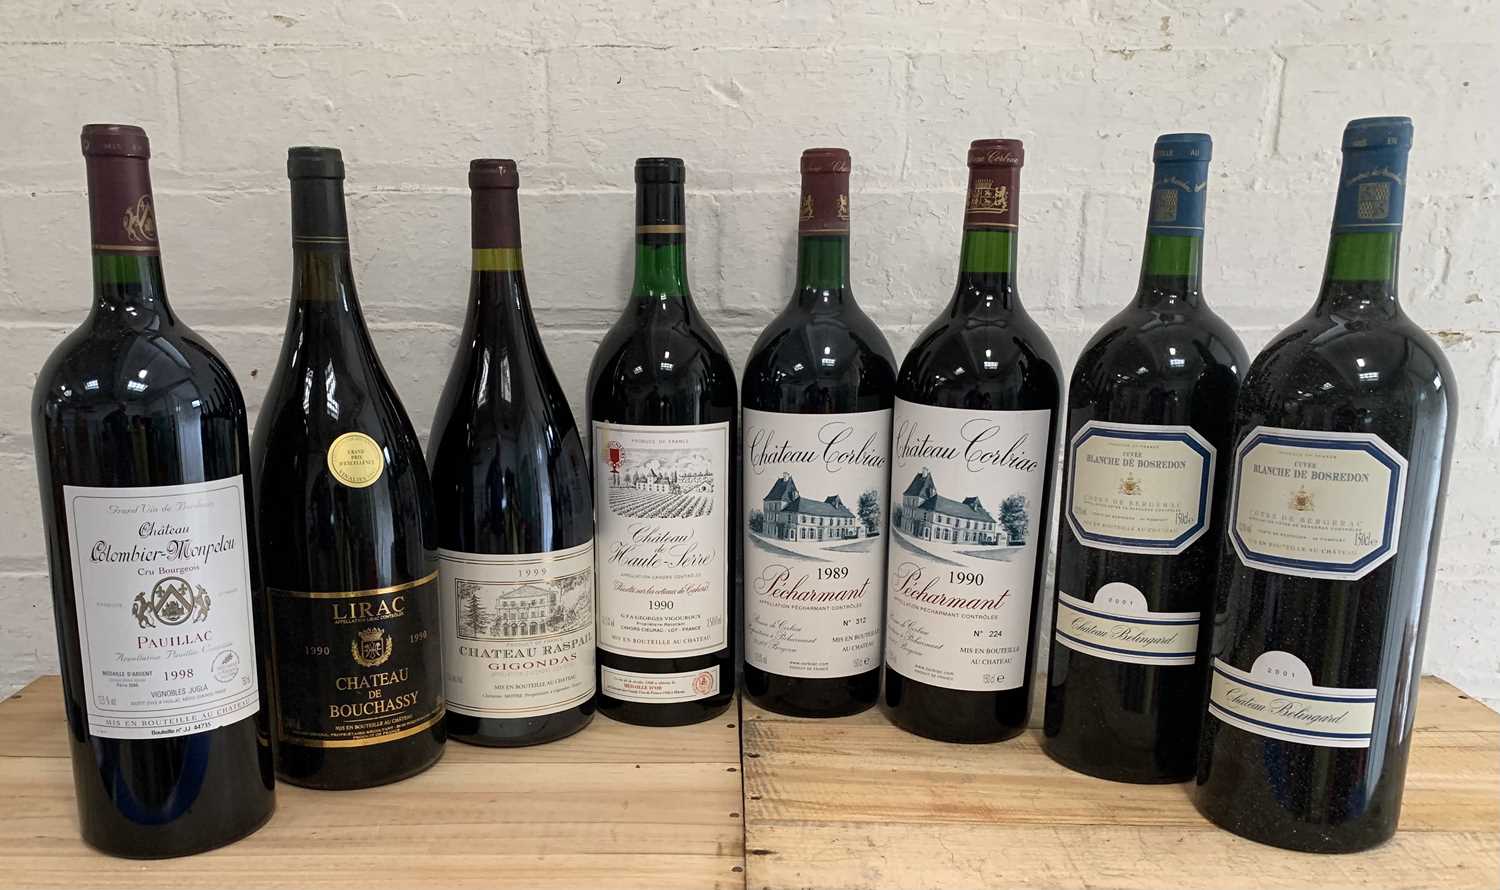 Lot 4 - Collection of 8 Magnums from Bordeaux, Rhone Valley, Bergerac, Cahors and Pecharmant